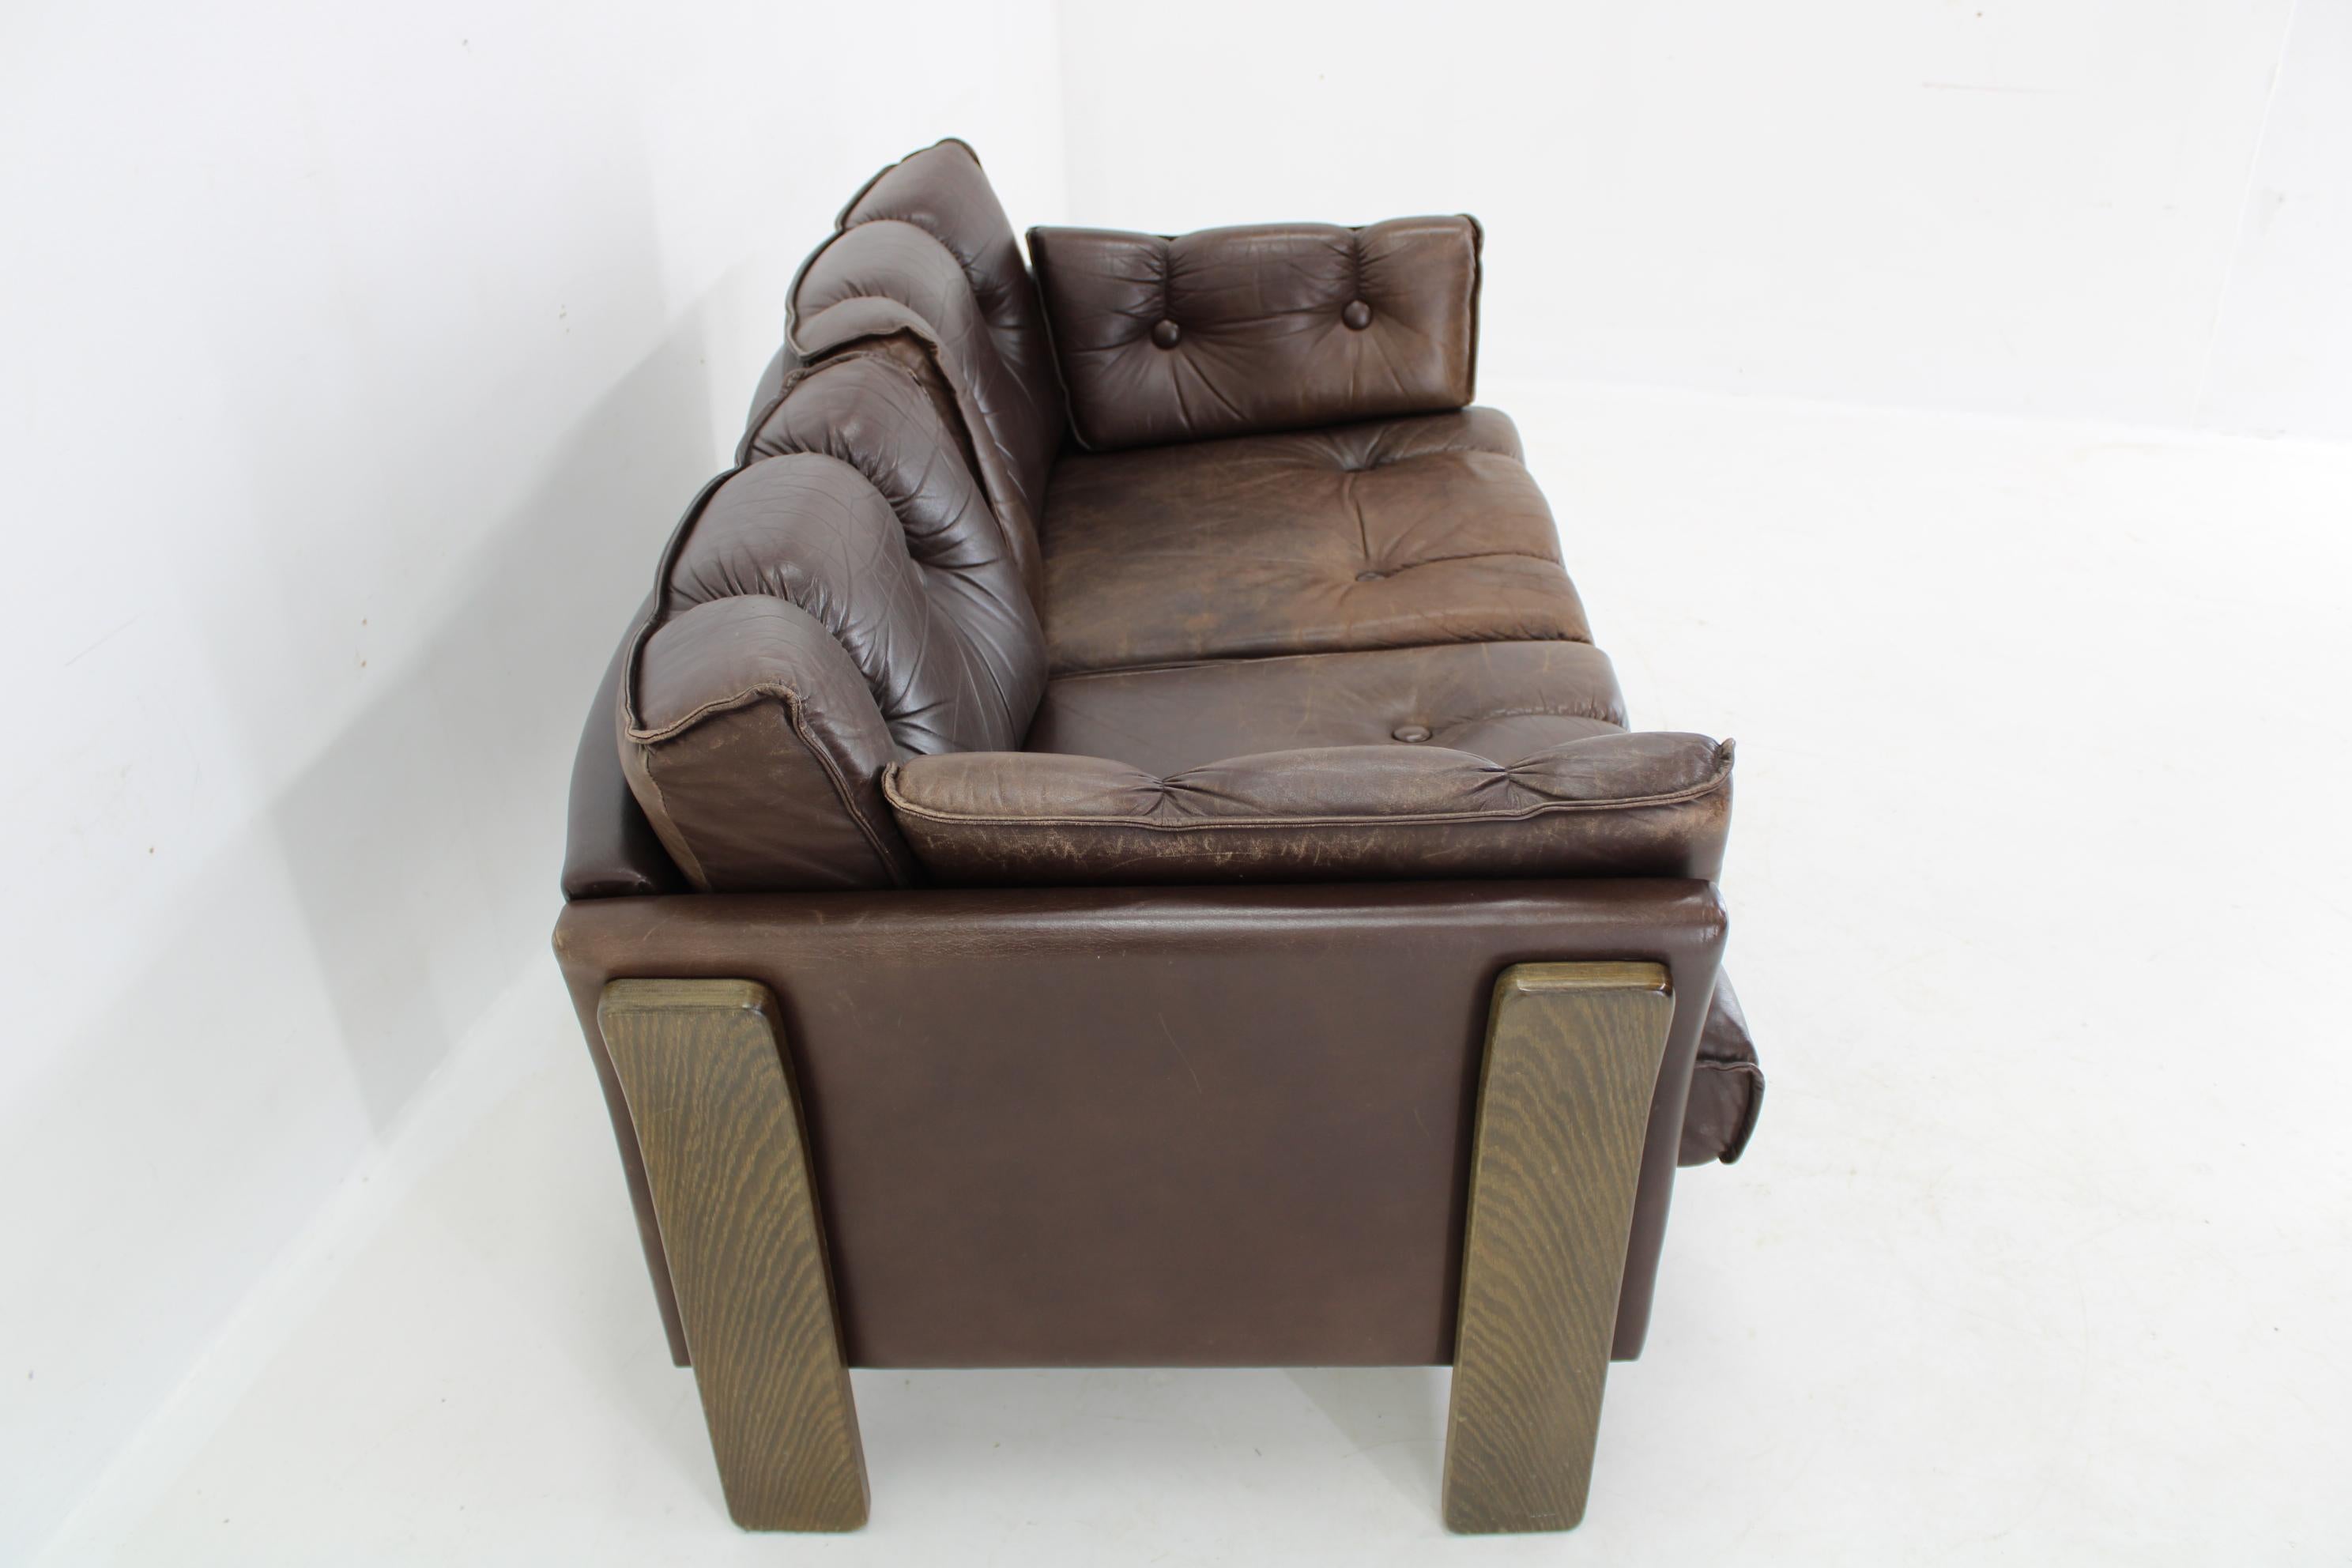 1970s Brown Leather 2-Seater Sofa, Denmark For Sale 2